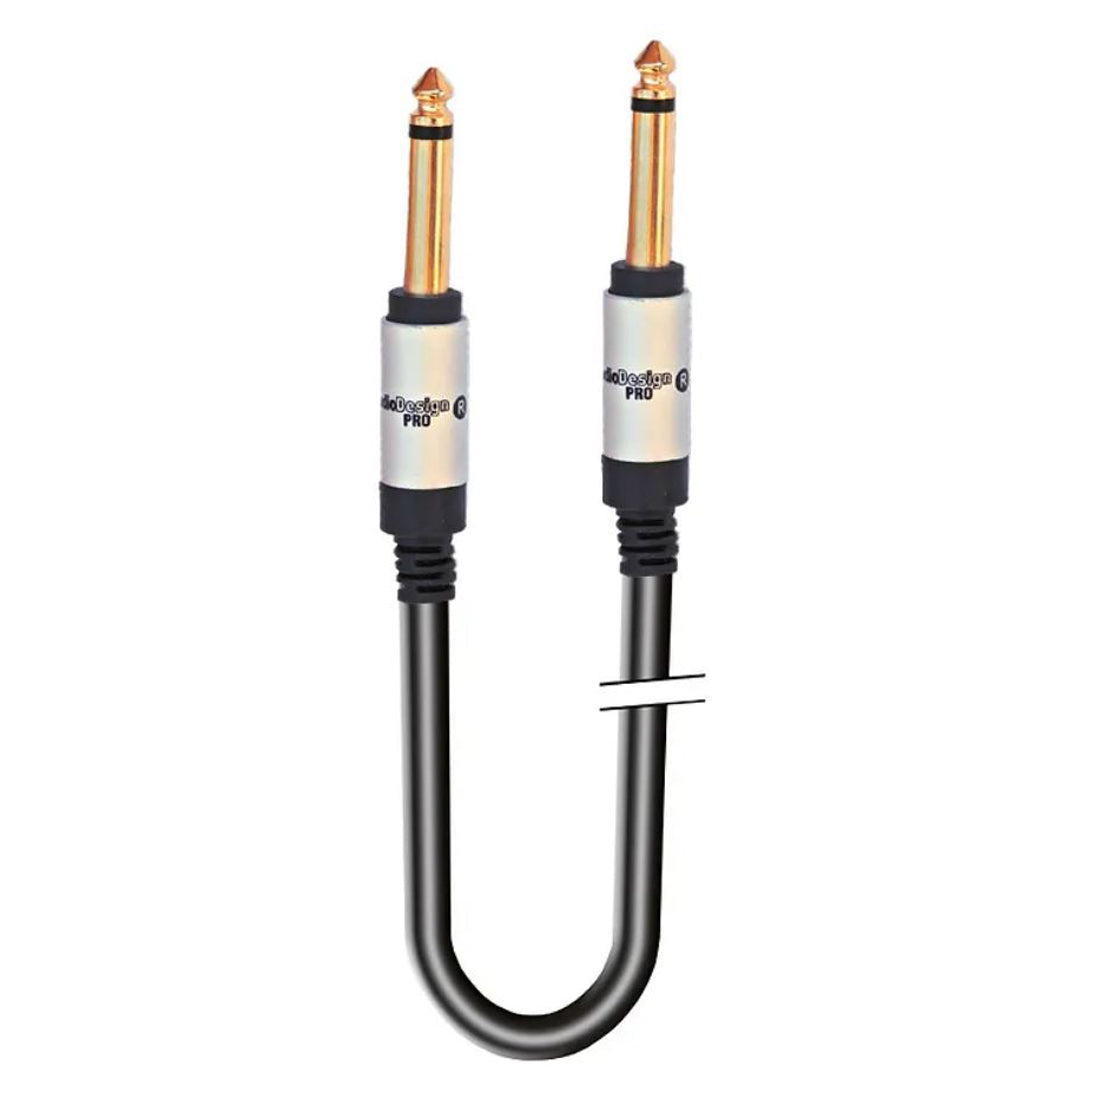 AudioDesign Pro Professional cable from Jack 6.3 Mono to Jack 6.3 Mono, length 3 m